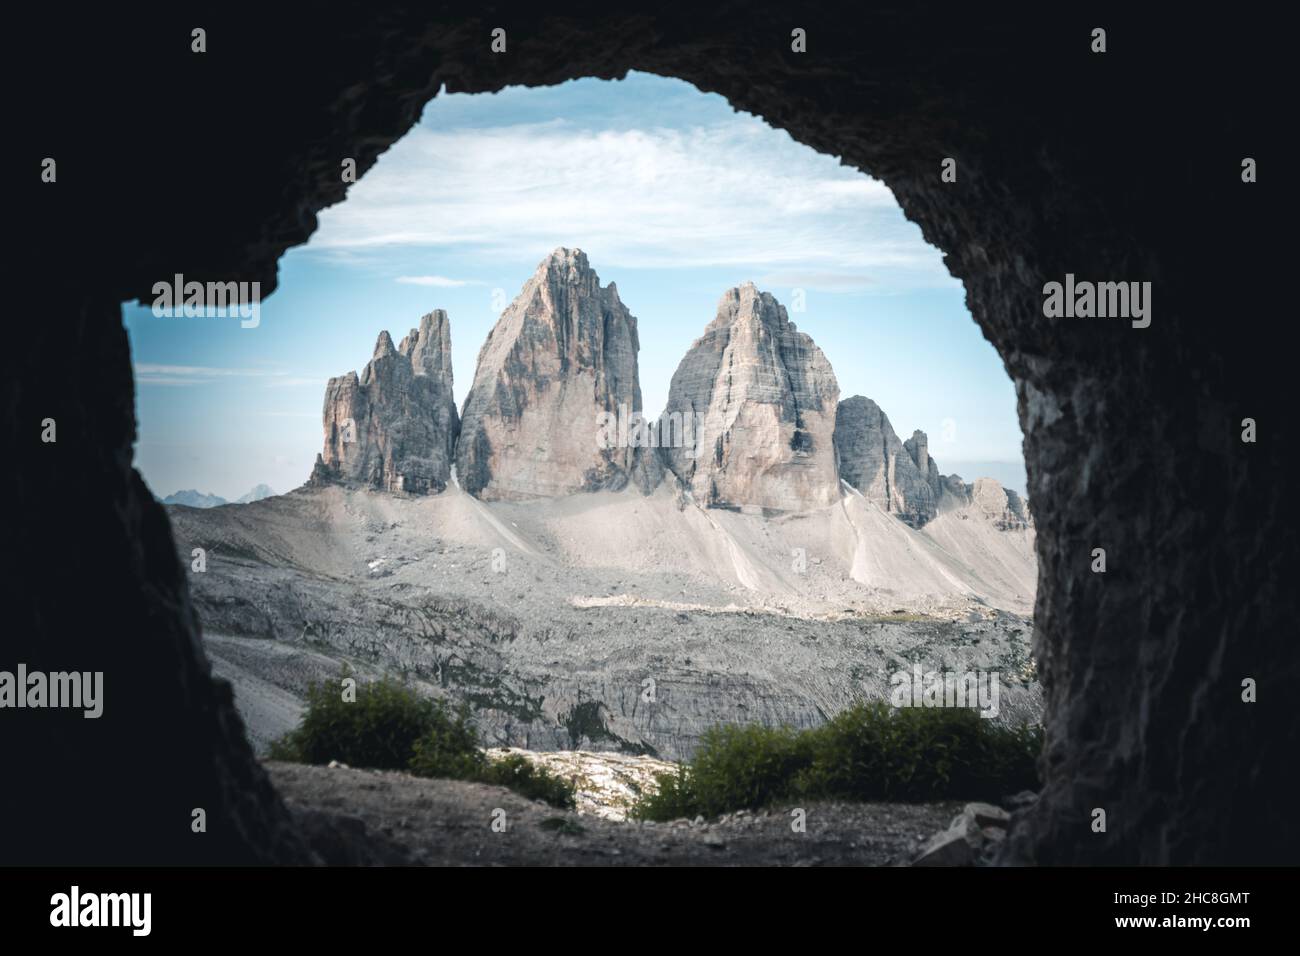 three peaks of lavaredo peaks as seen from inside a cave where soldiers use to sleep during the second or first world war Stock Photo